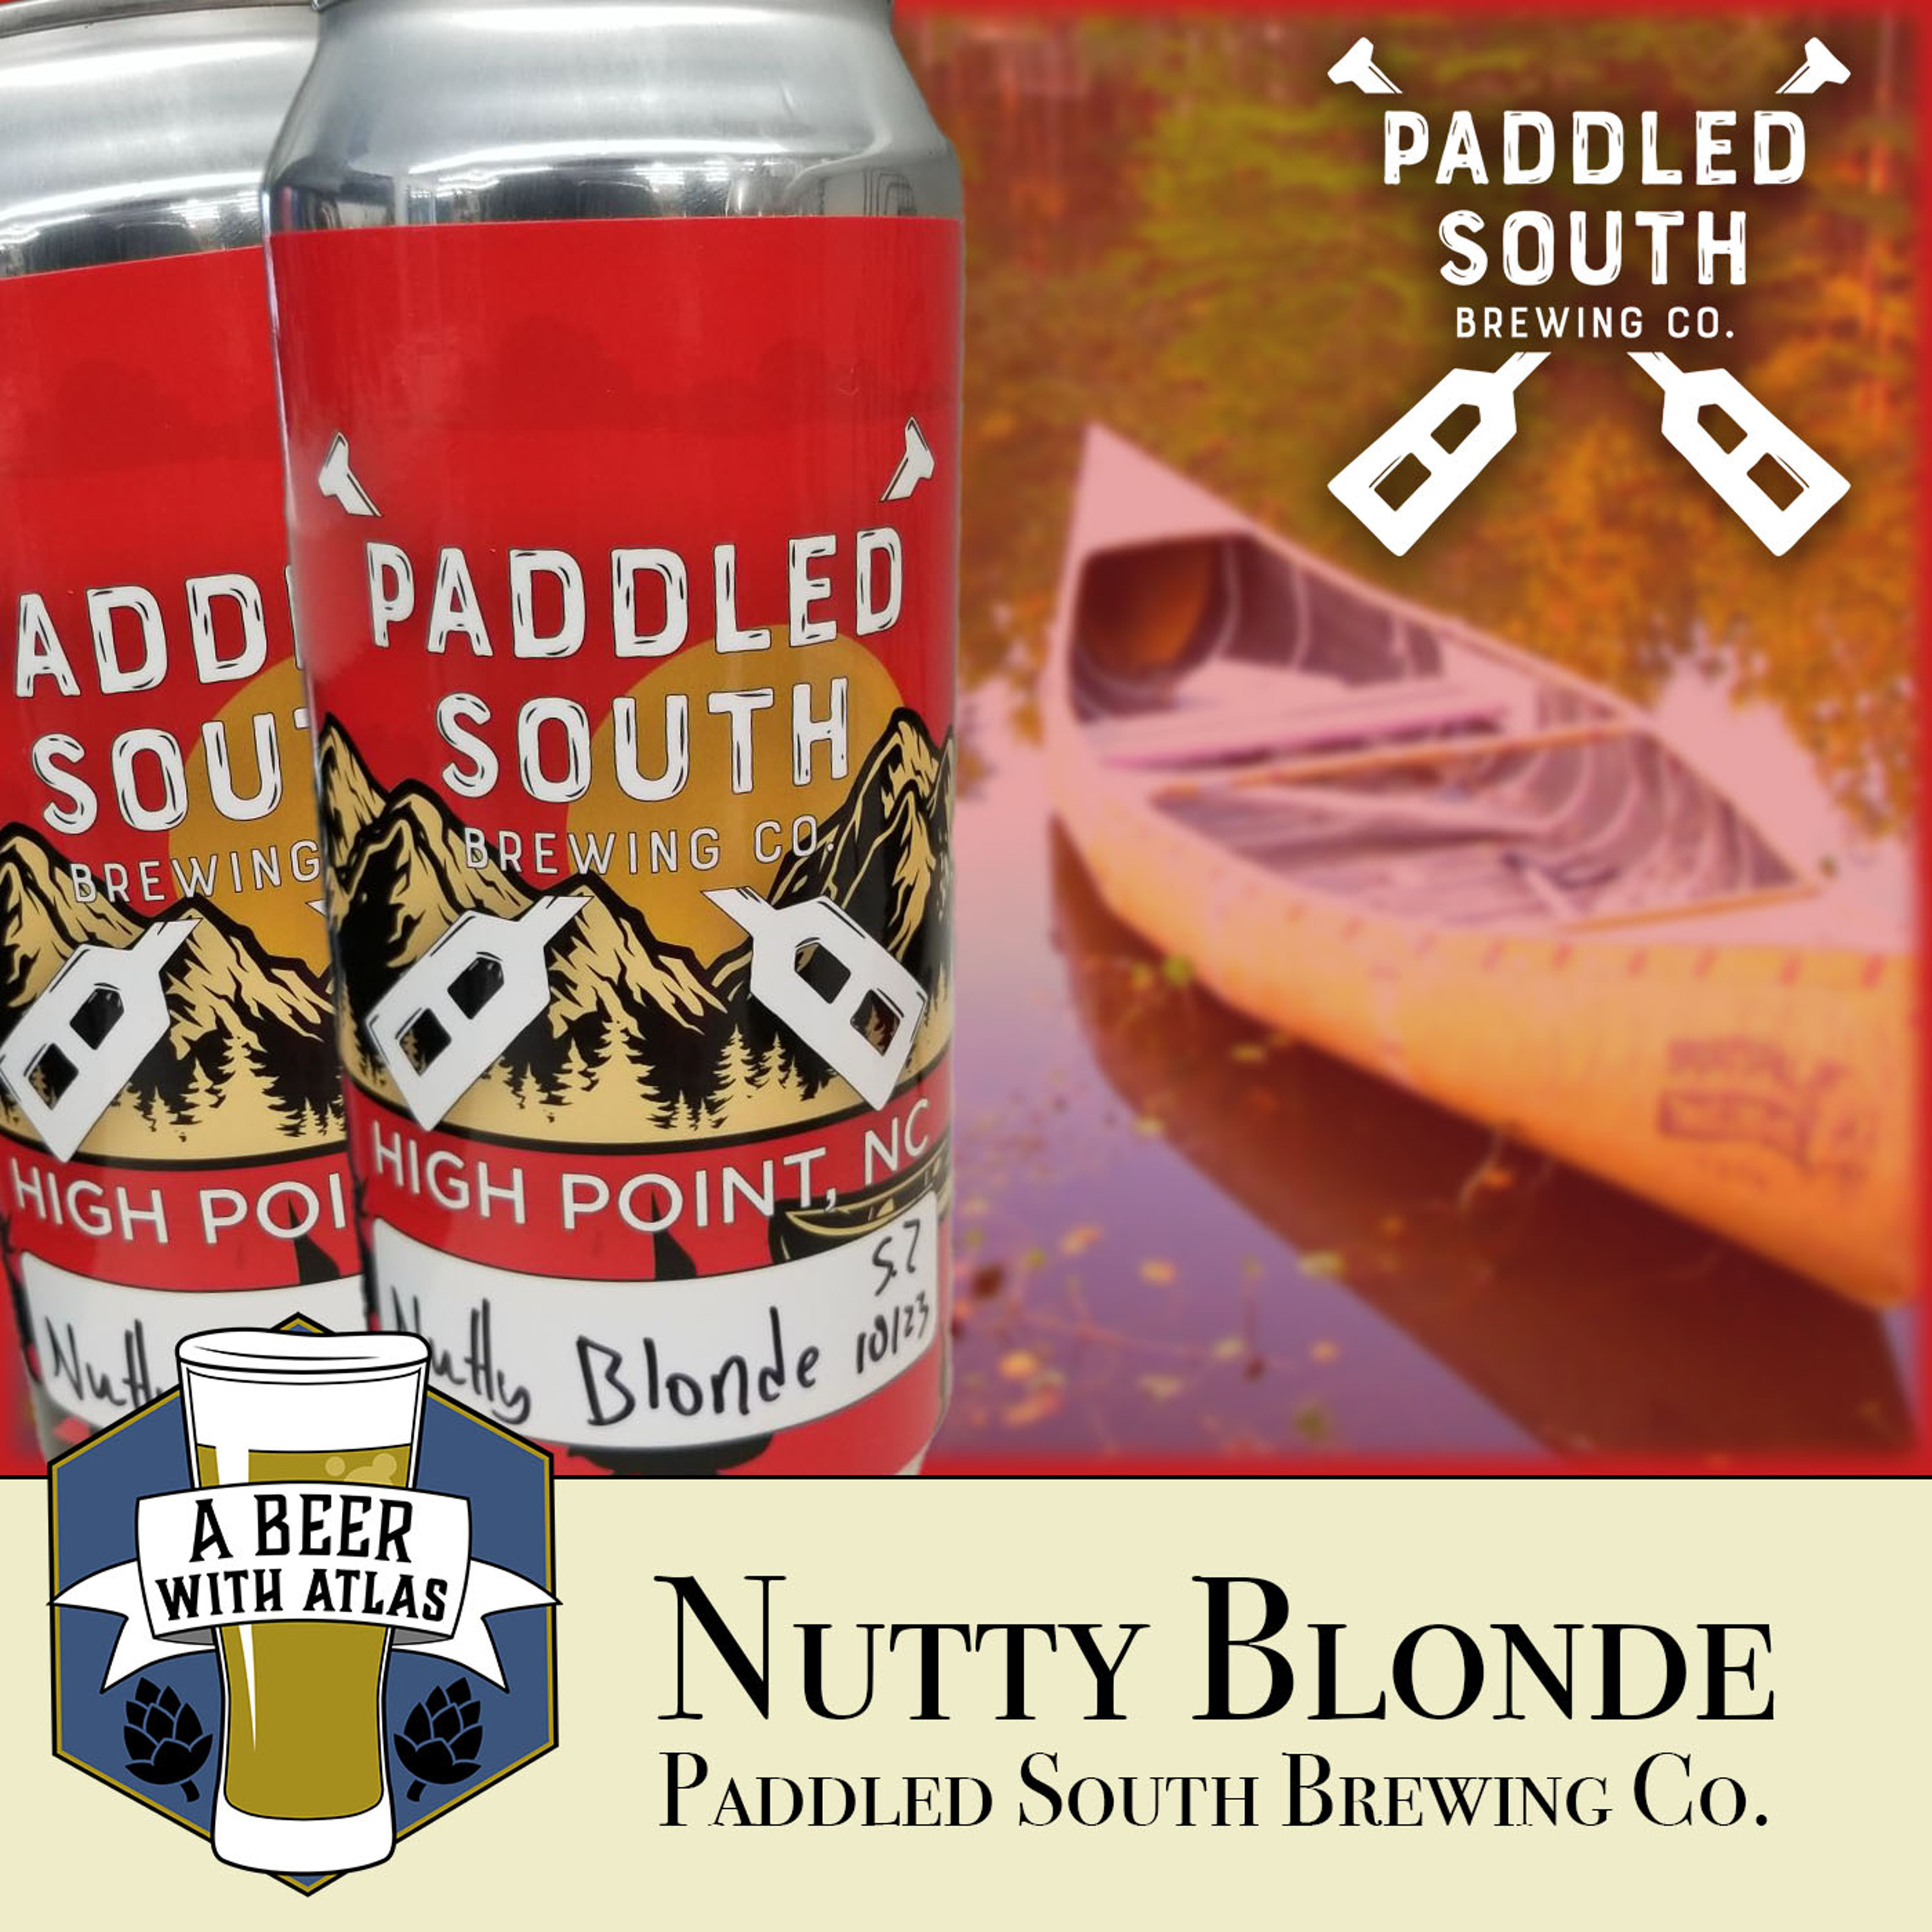 Nutty Blonde by Paddled South Brewing Co. - A Beer with Atlas 221